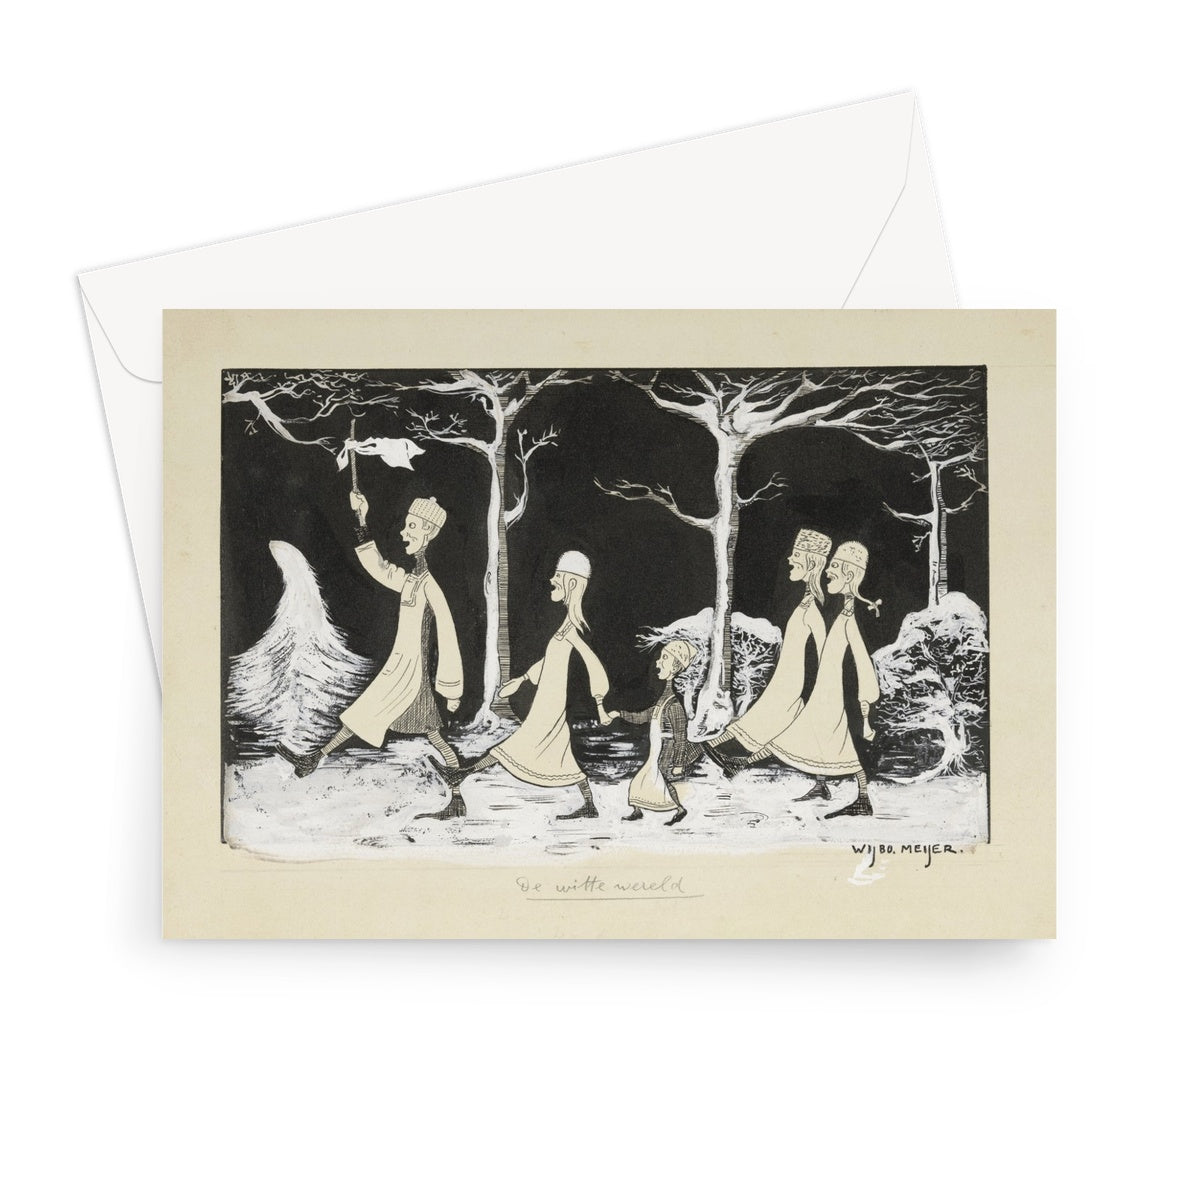 Henk, Anne, Hans, Noor and Elly Marching Through the Snow by Wybo Meijer, c. 1913  -Greeting Card